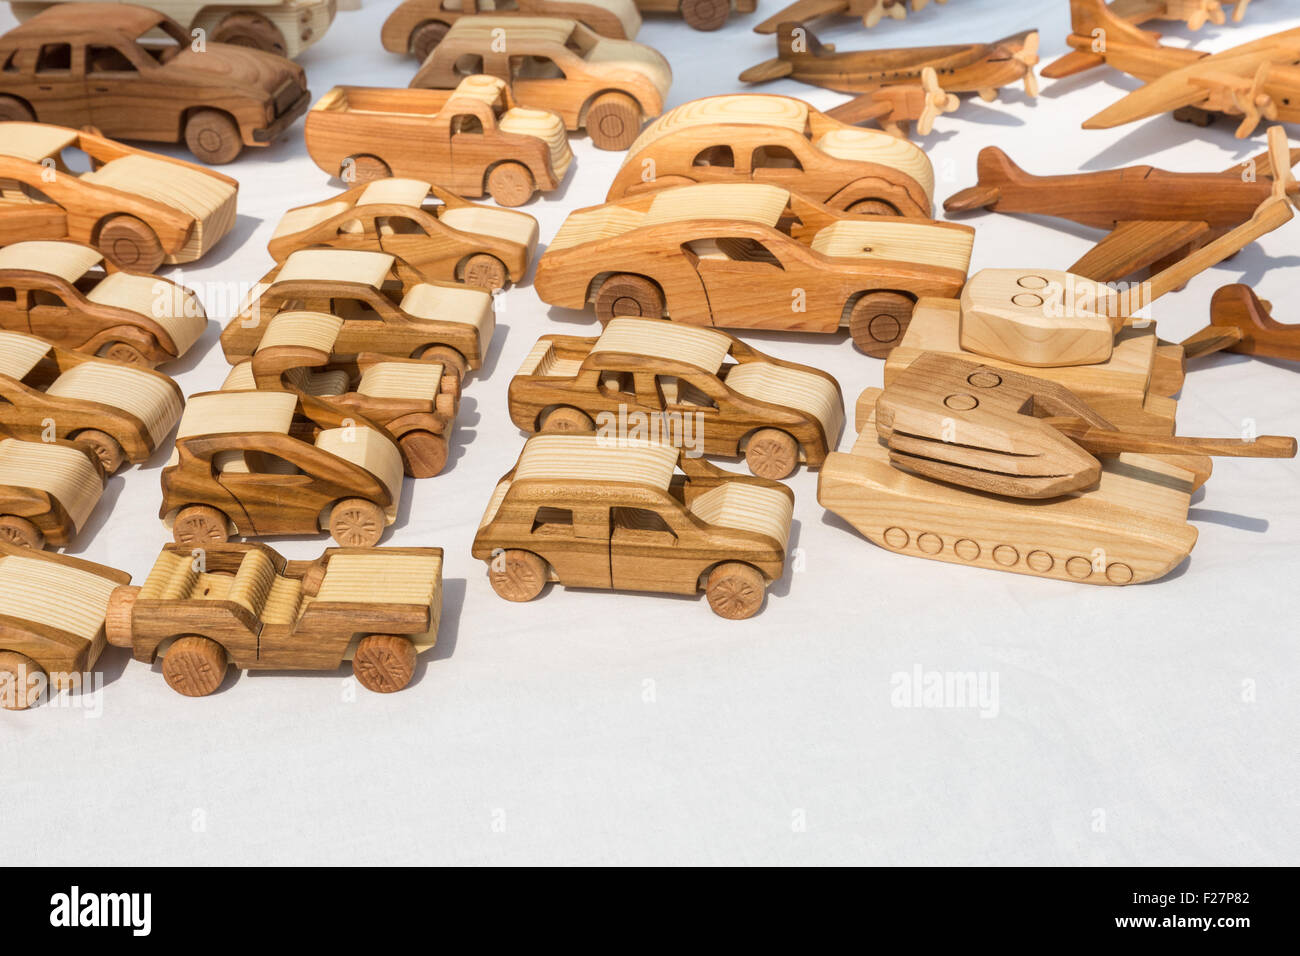 a selection of wooden toy cars, tanks and planes Stock Photo